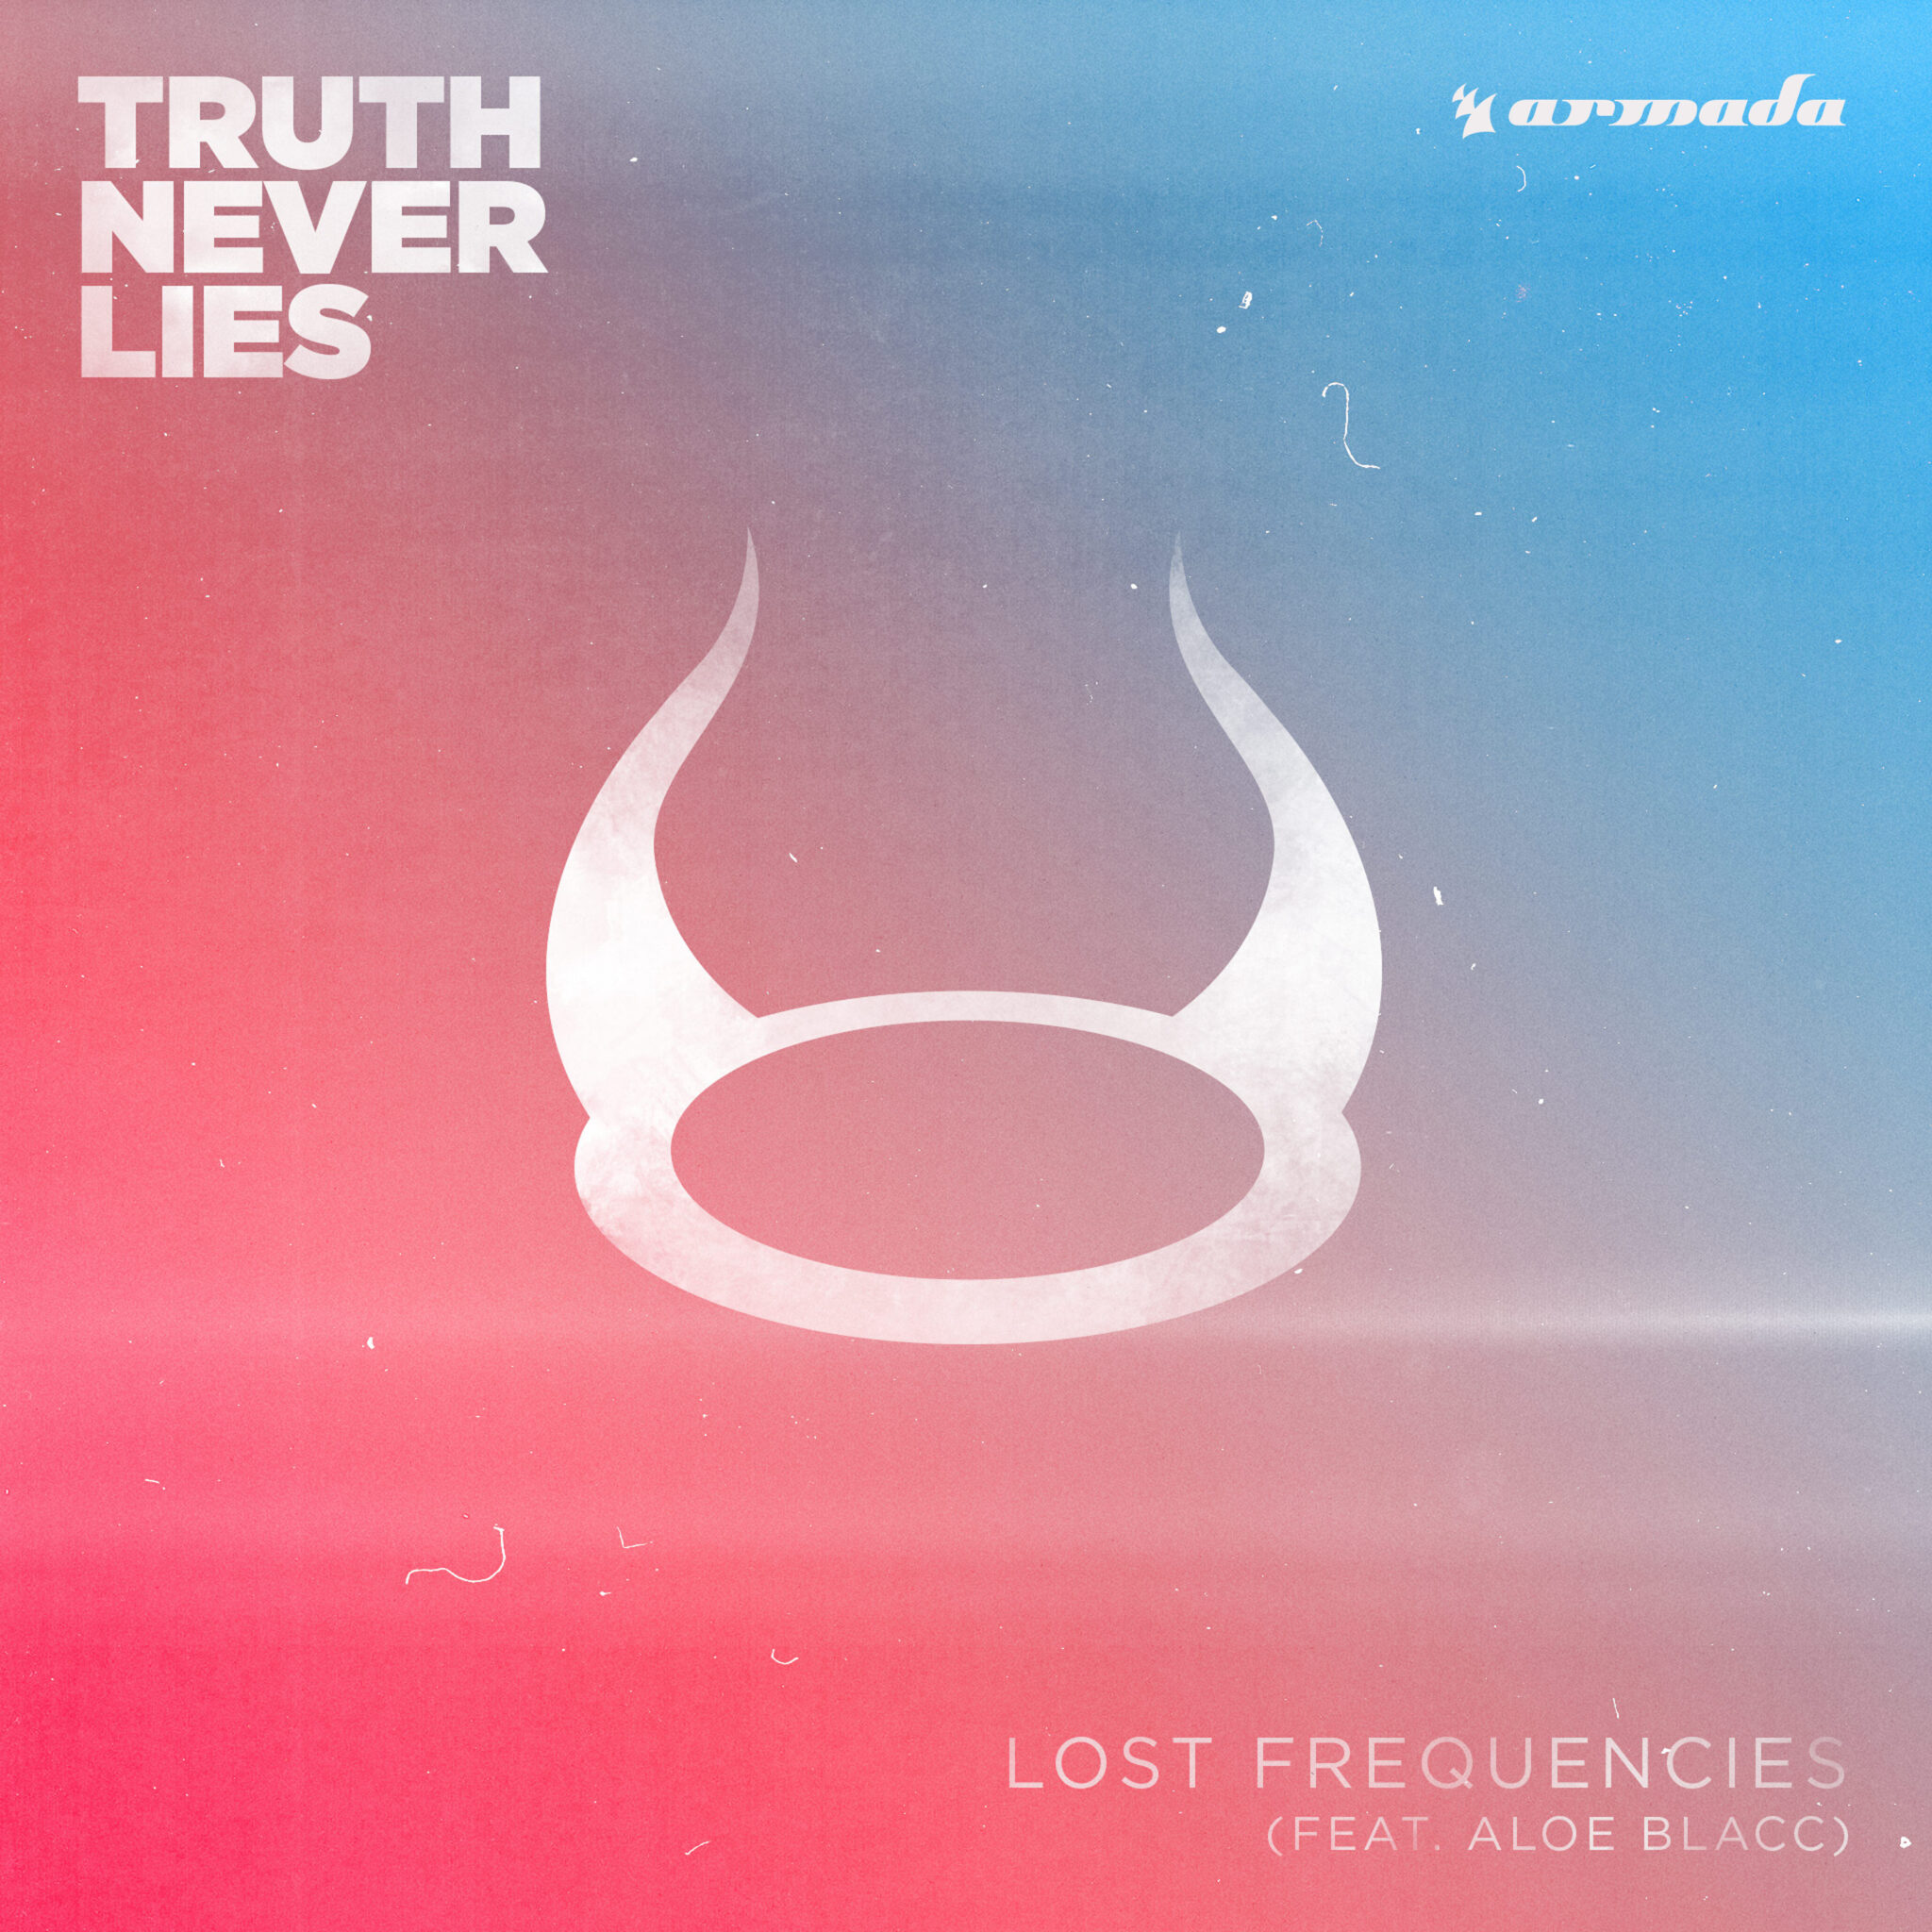 Lost Frequencies - Truth Never Lies (feat. Aloe Blacc) [Dance-pop]